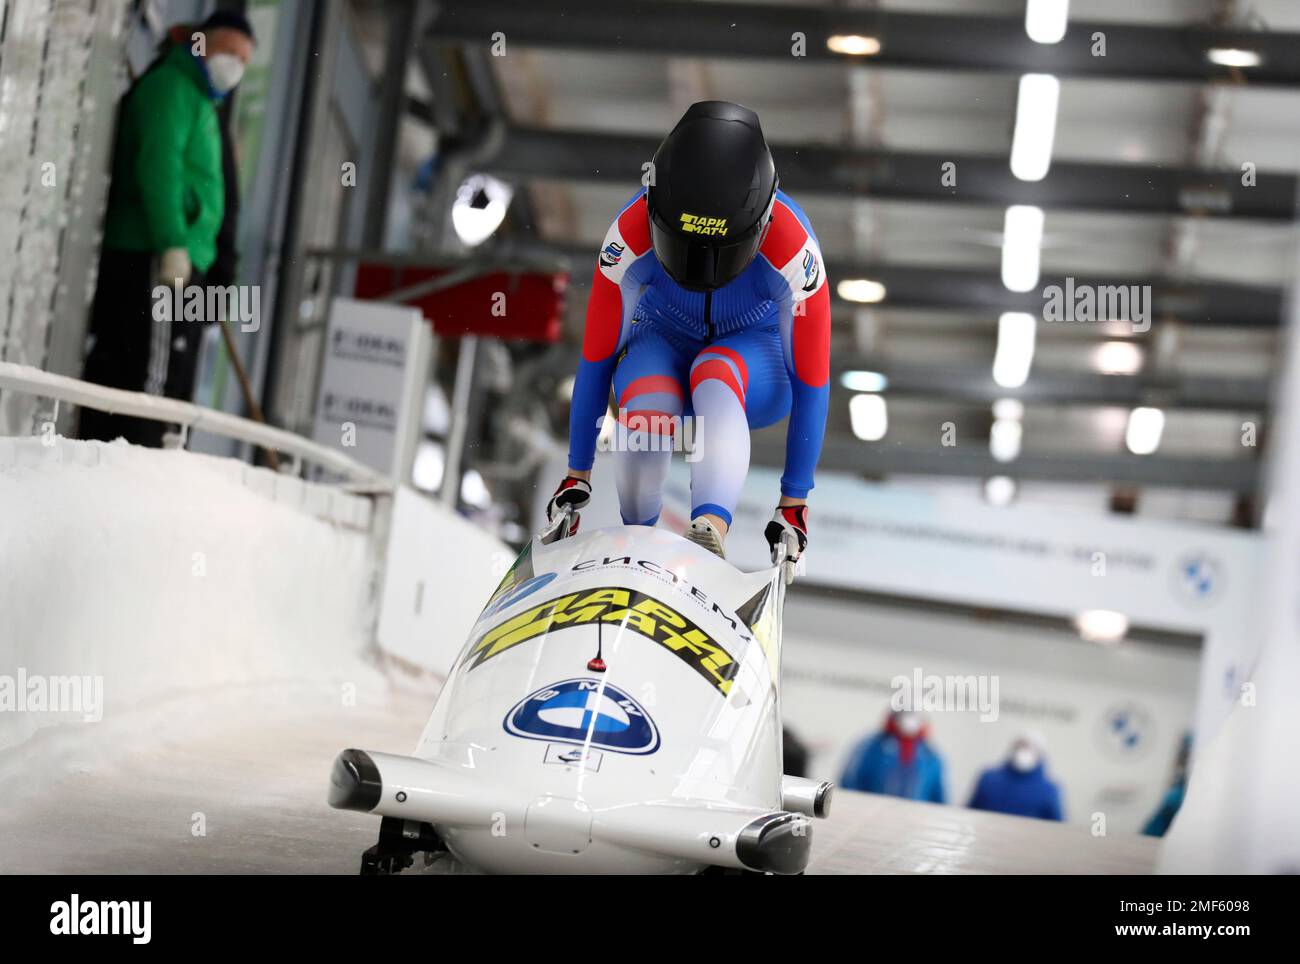 Russias bobsleigh pilot Nadezhda Sergeeva at the start of the womens monobob race at the Bobsleigh and Skeleton World Championships in Altenberg, Germany, Saturday, Feb.13, 2021